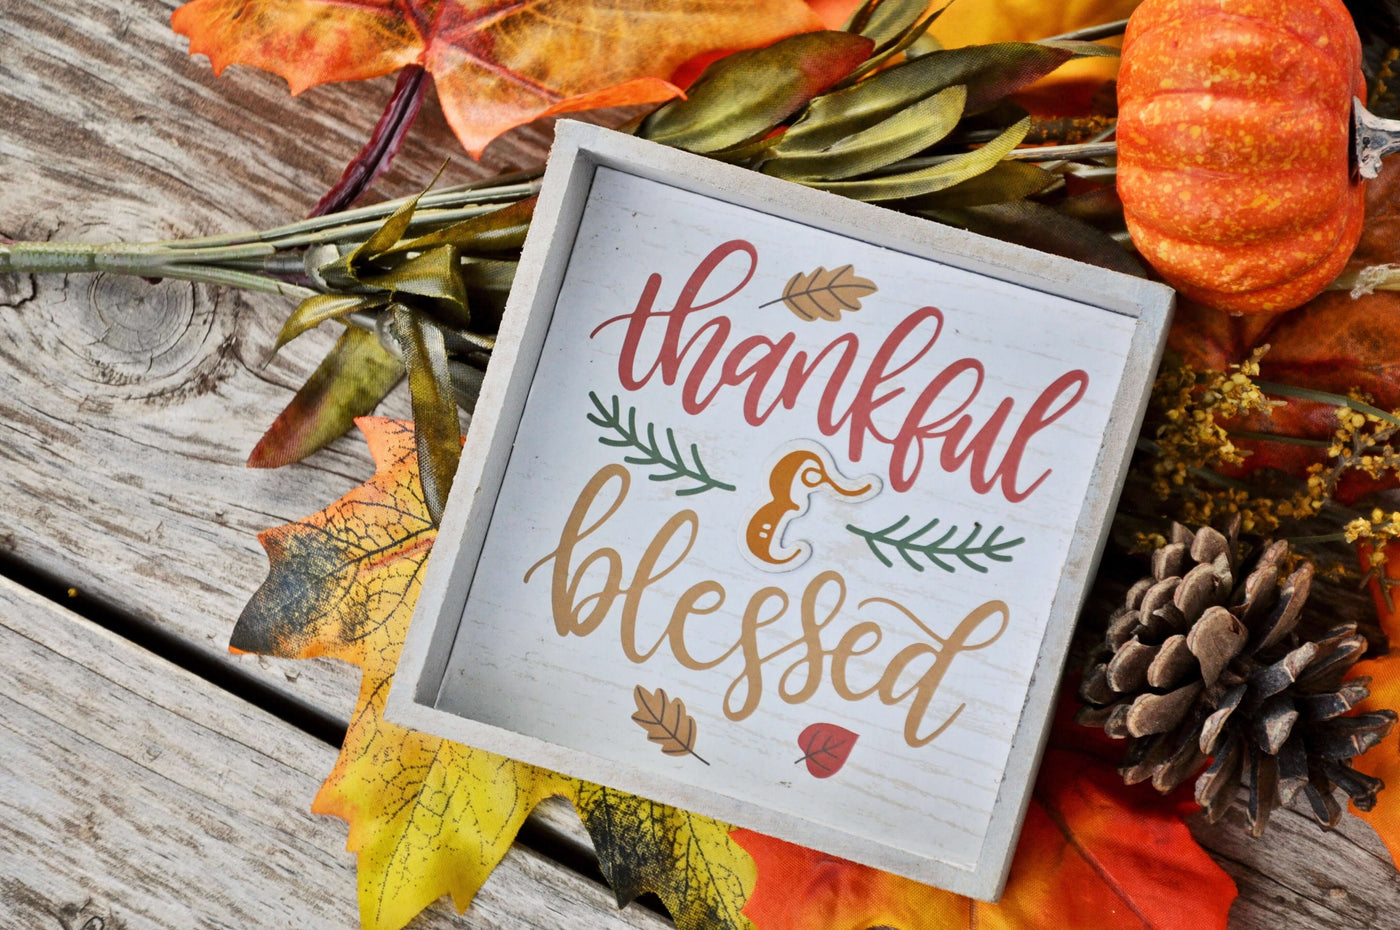 ENTERTAINING THANKSGIVING ACTIVITIES TO CELEBRATE THE PASSING YEAR WITH GRATITUDE